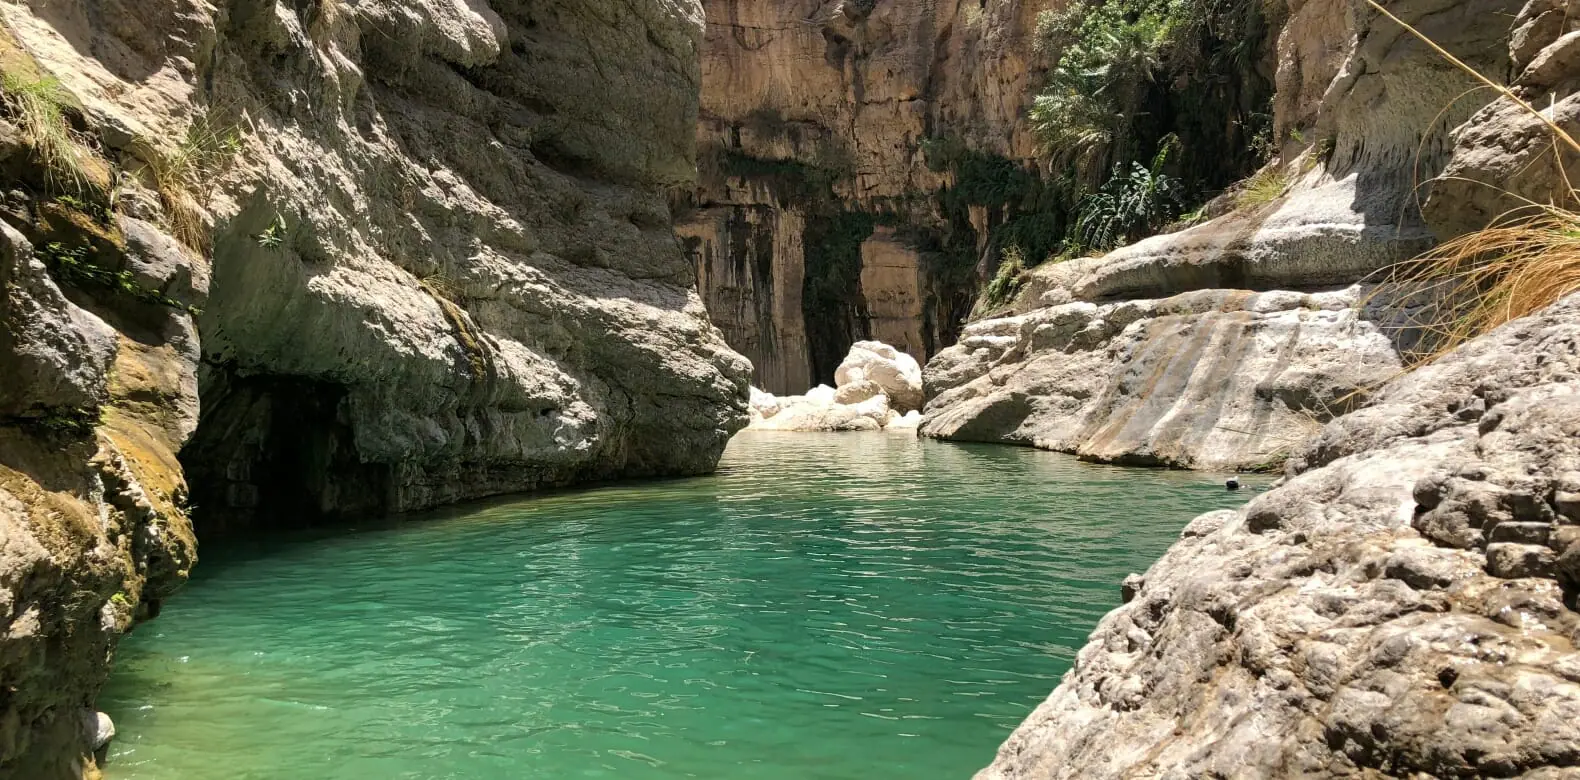 Canyoning in Oman